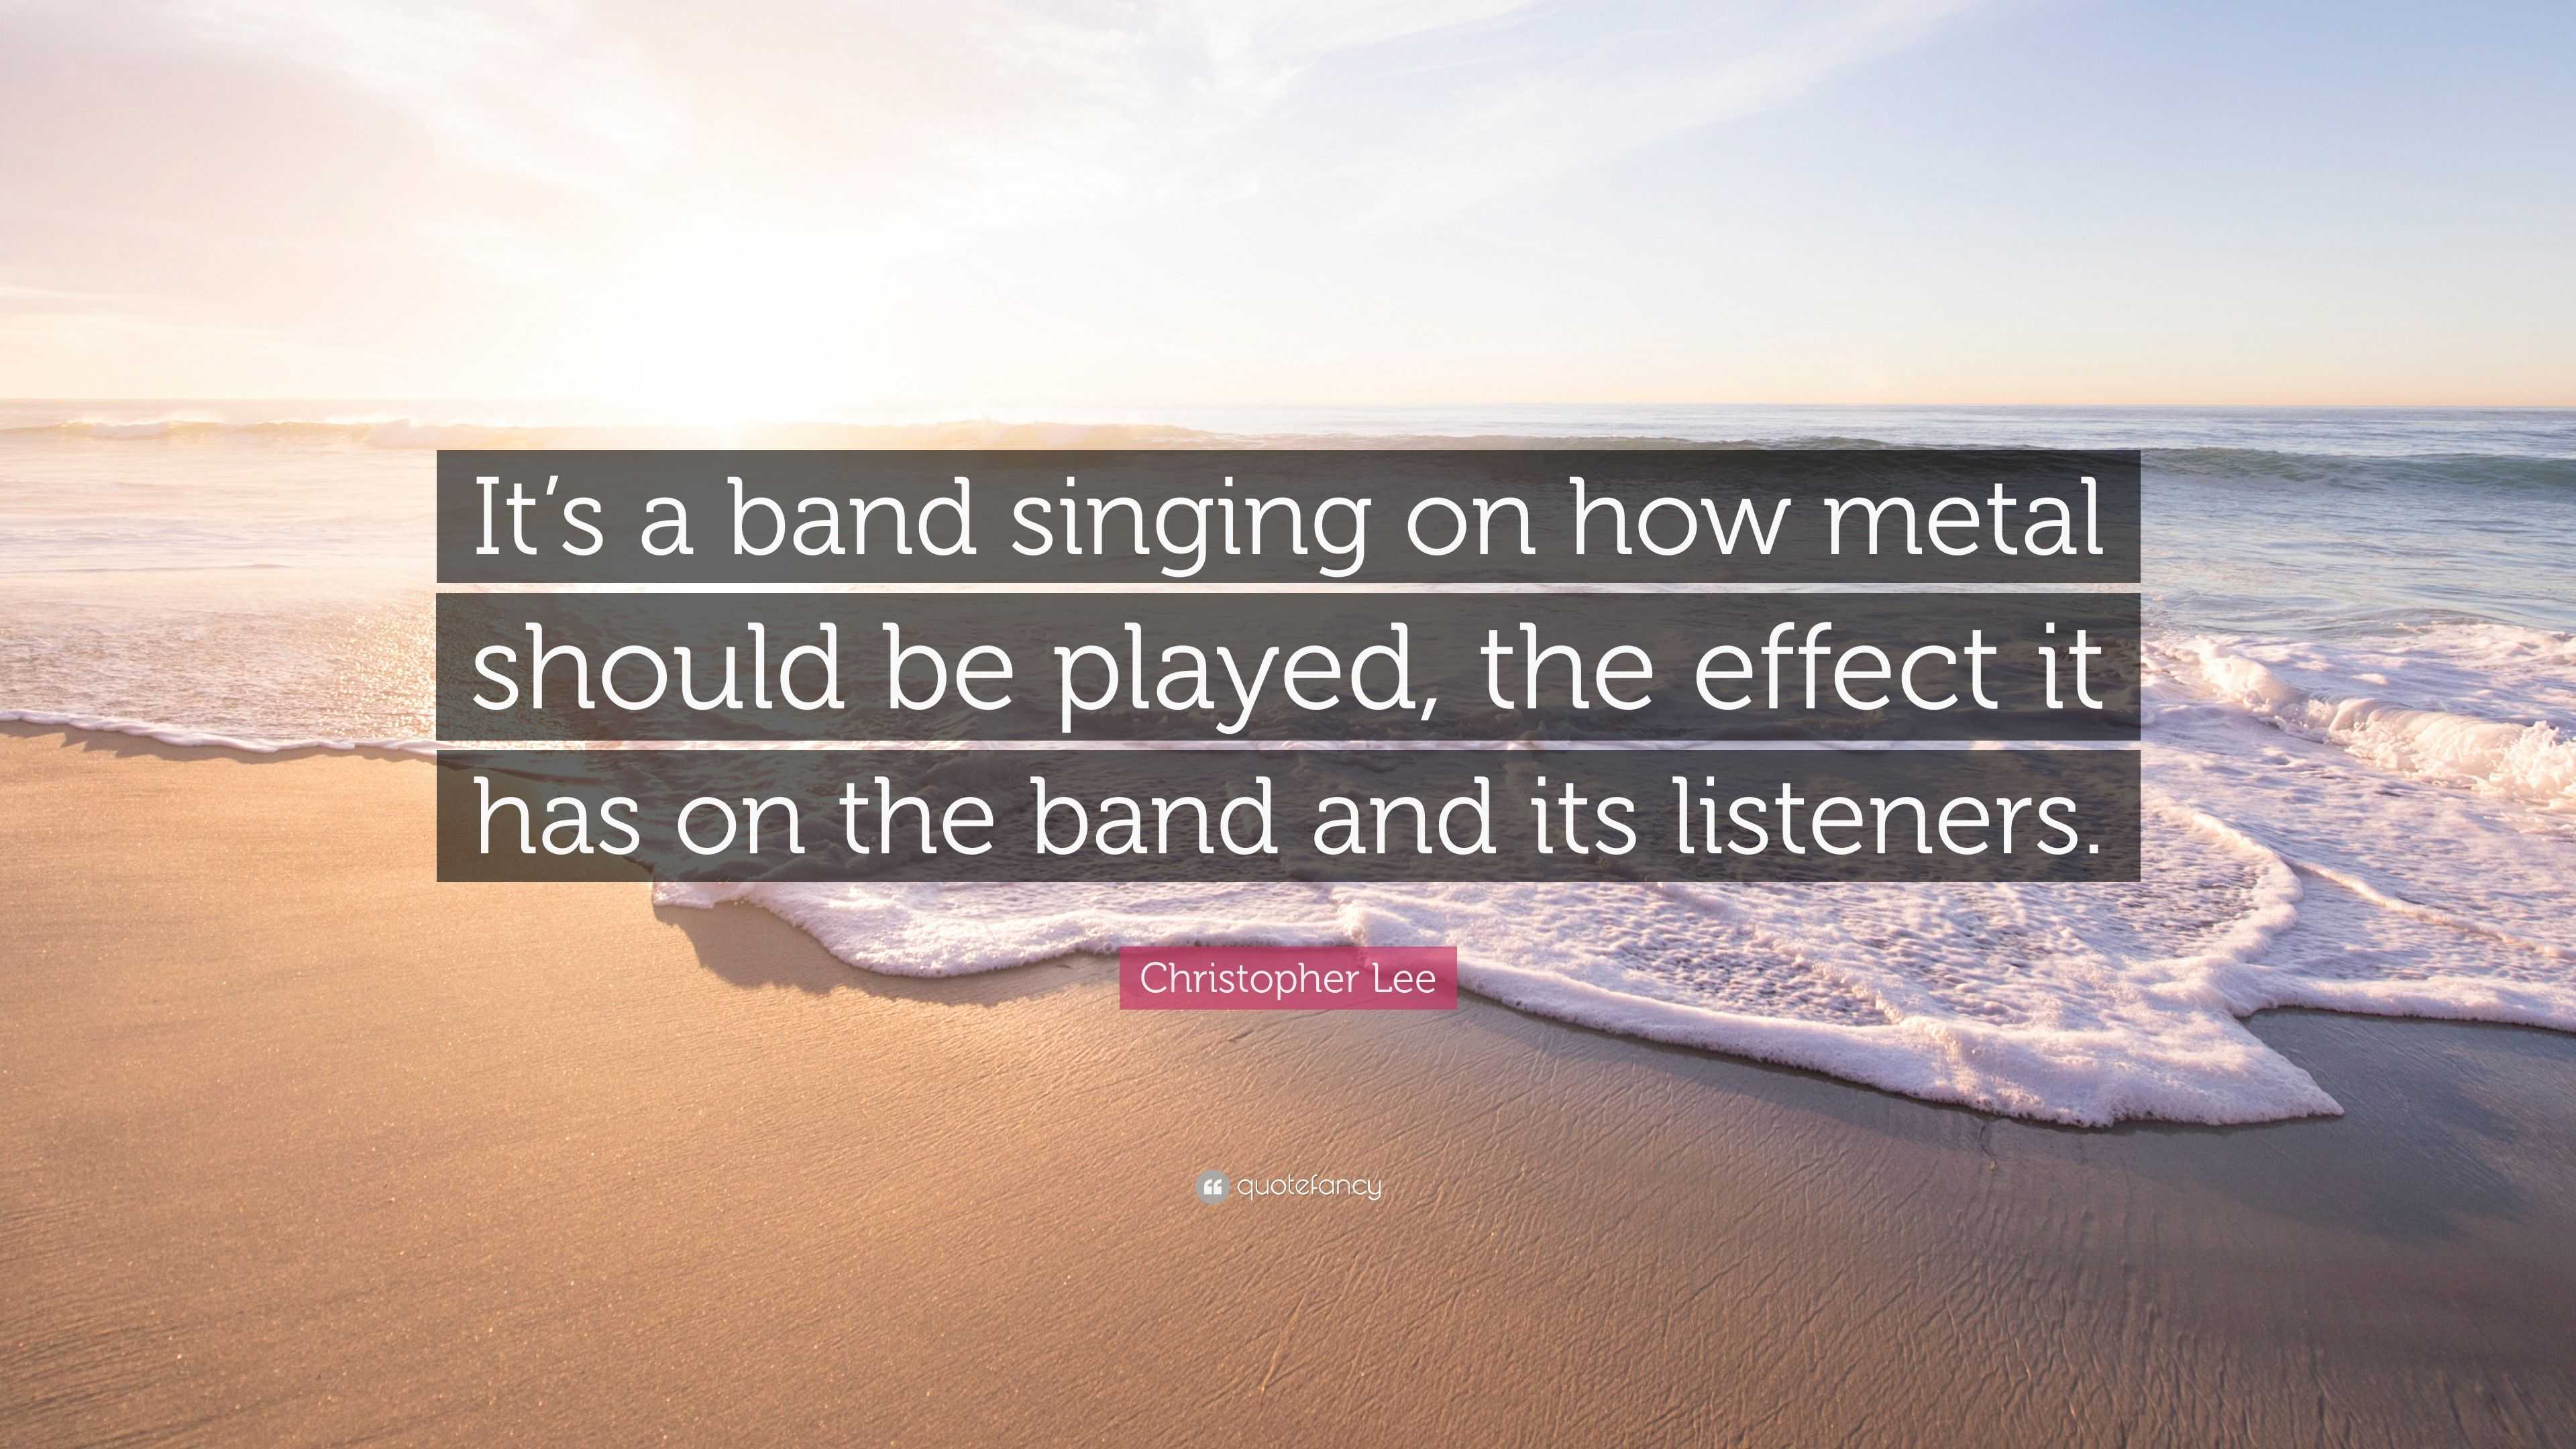 Christopher Lee Quote: “It's a band singing on how metal should be played,  the effect it